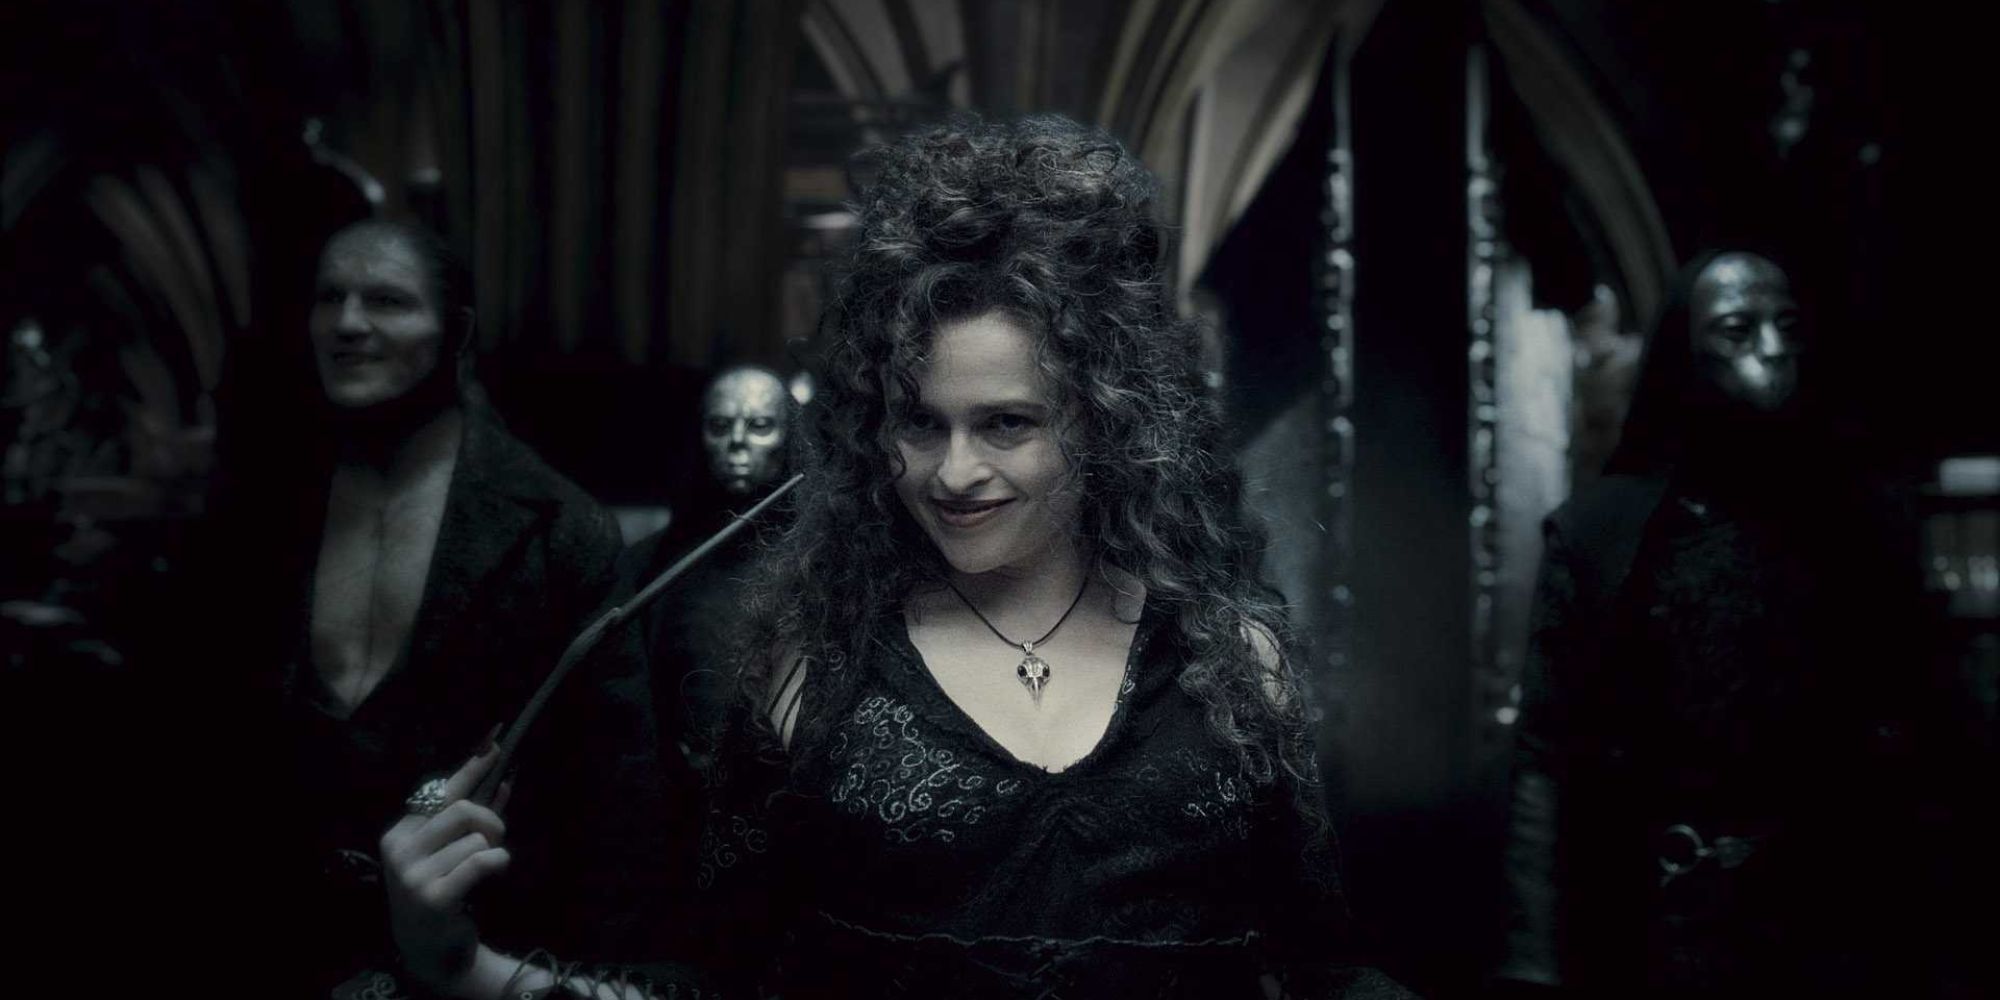 Bellatrix grins with a group of death eaters behind her